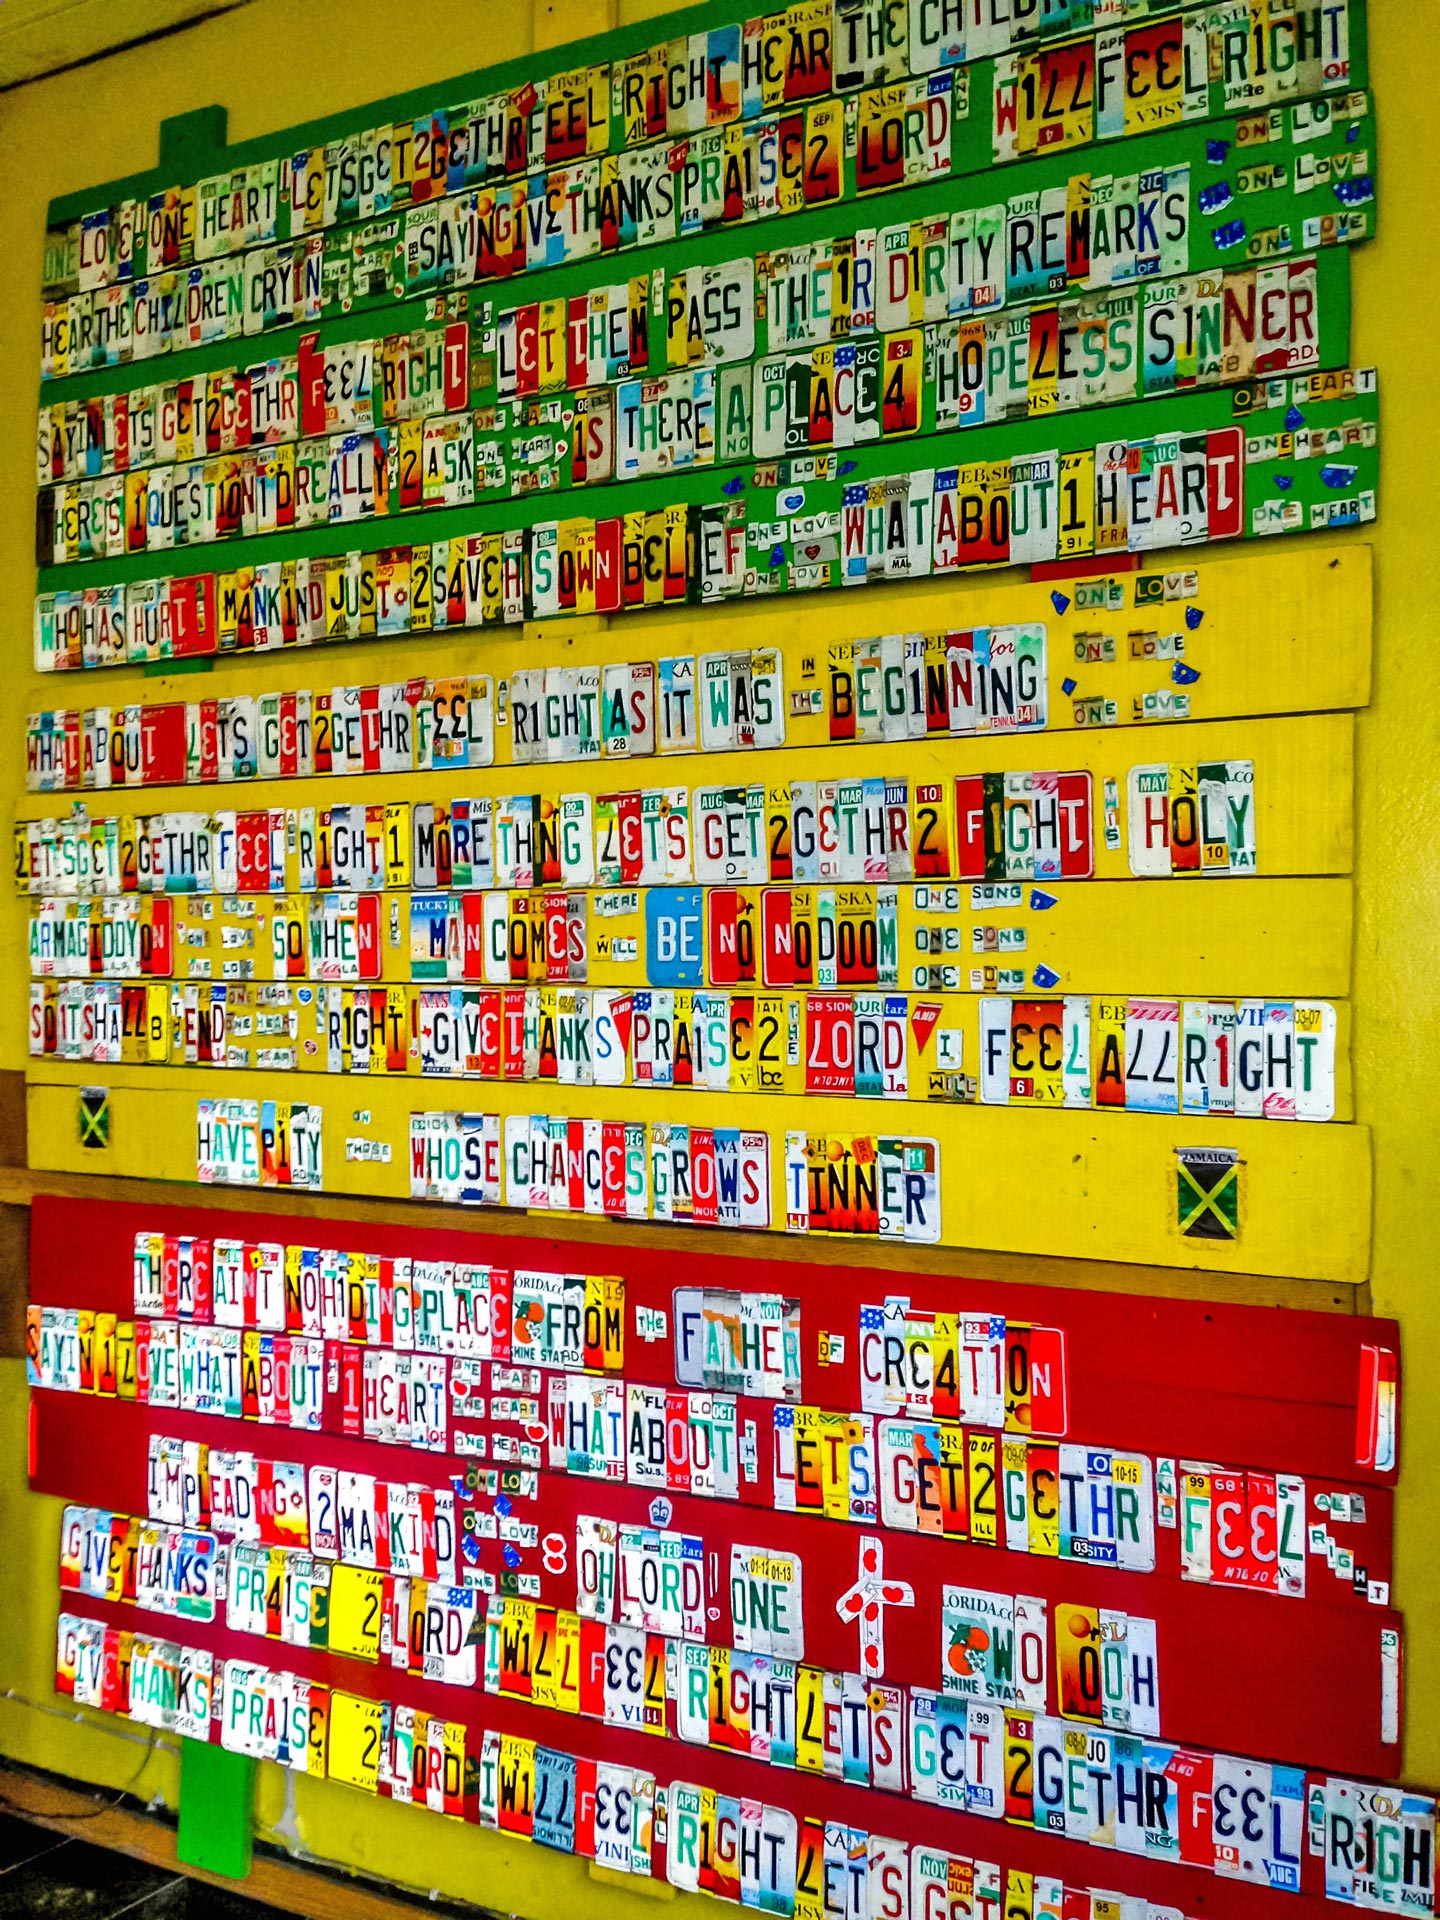 Lyrics of One Love made out of license plates at Tuff Gong International, Kingston